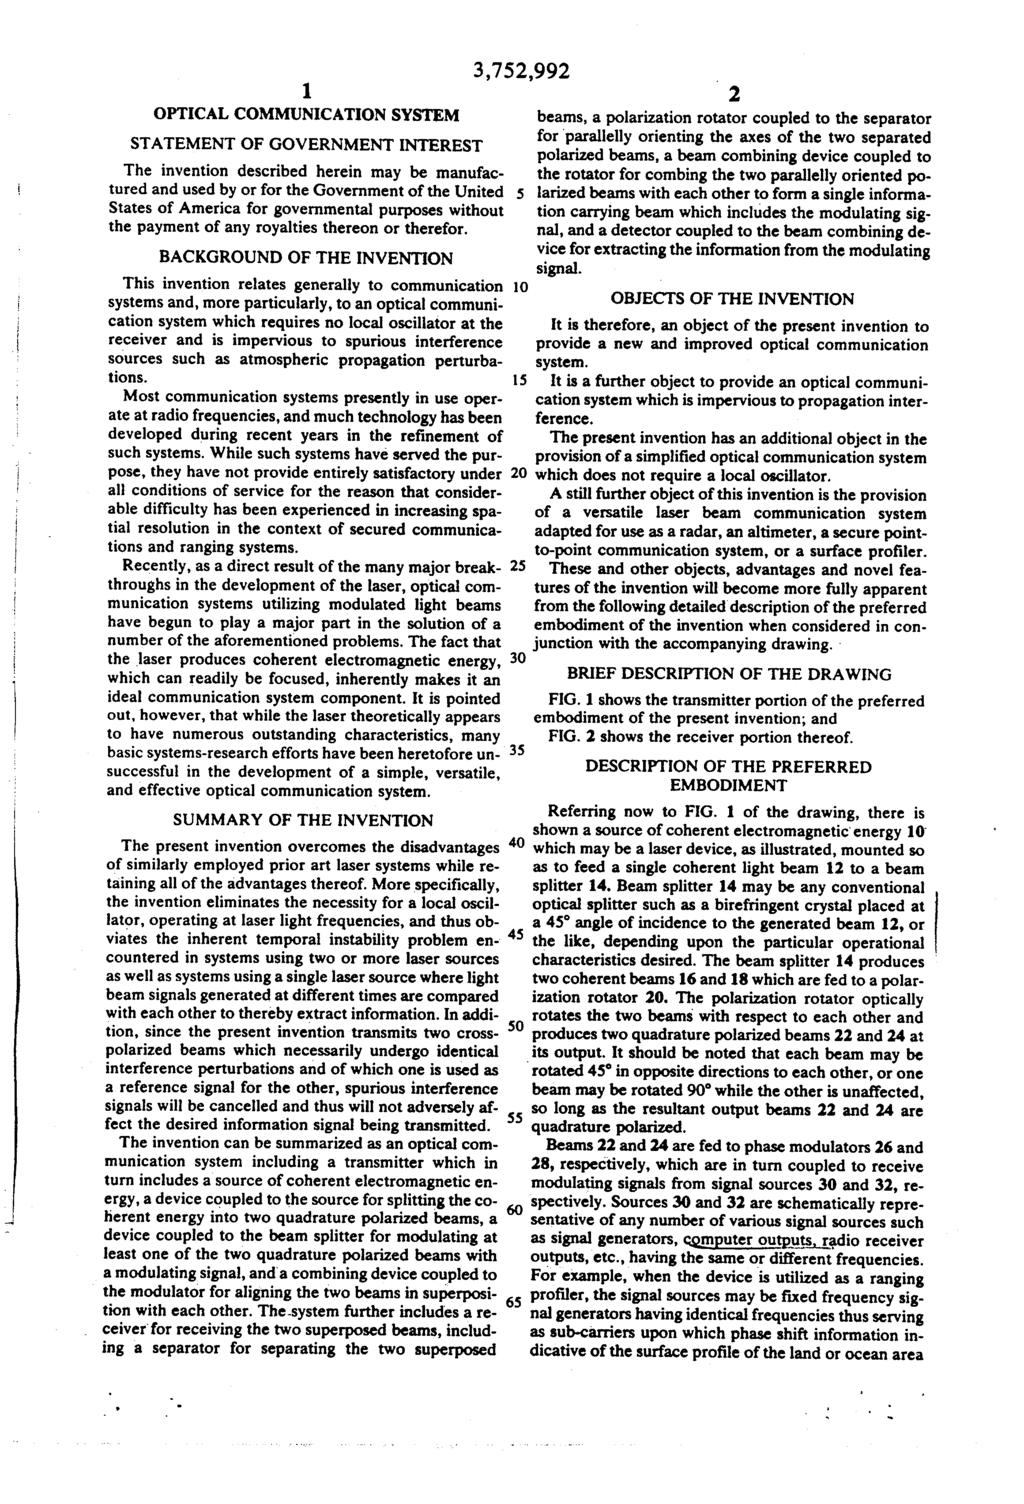 -- 1. OPTICAL COMMUNICATION SYSTEM STATEMENT OF GOVERNMENT INTEREST The invention described herein may be manufac tured and used by or for the Government of the United States of America for